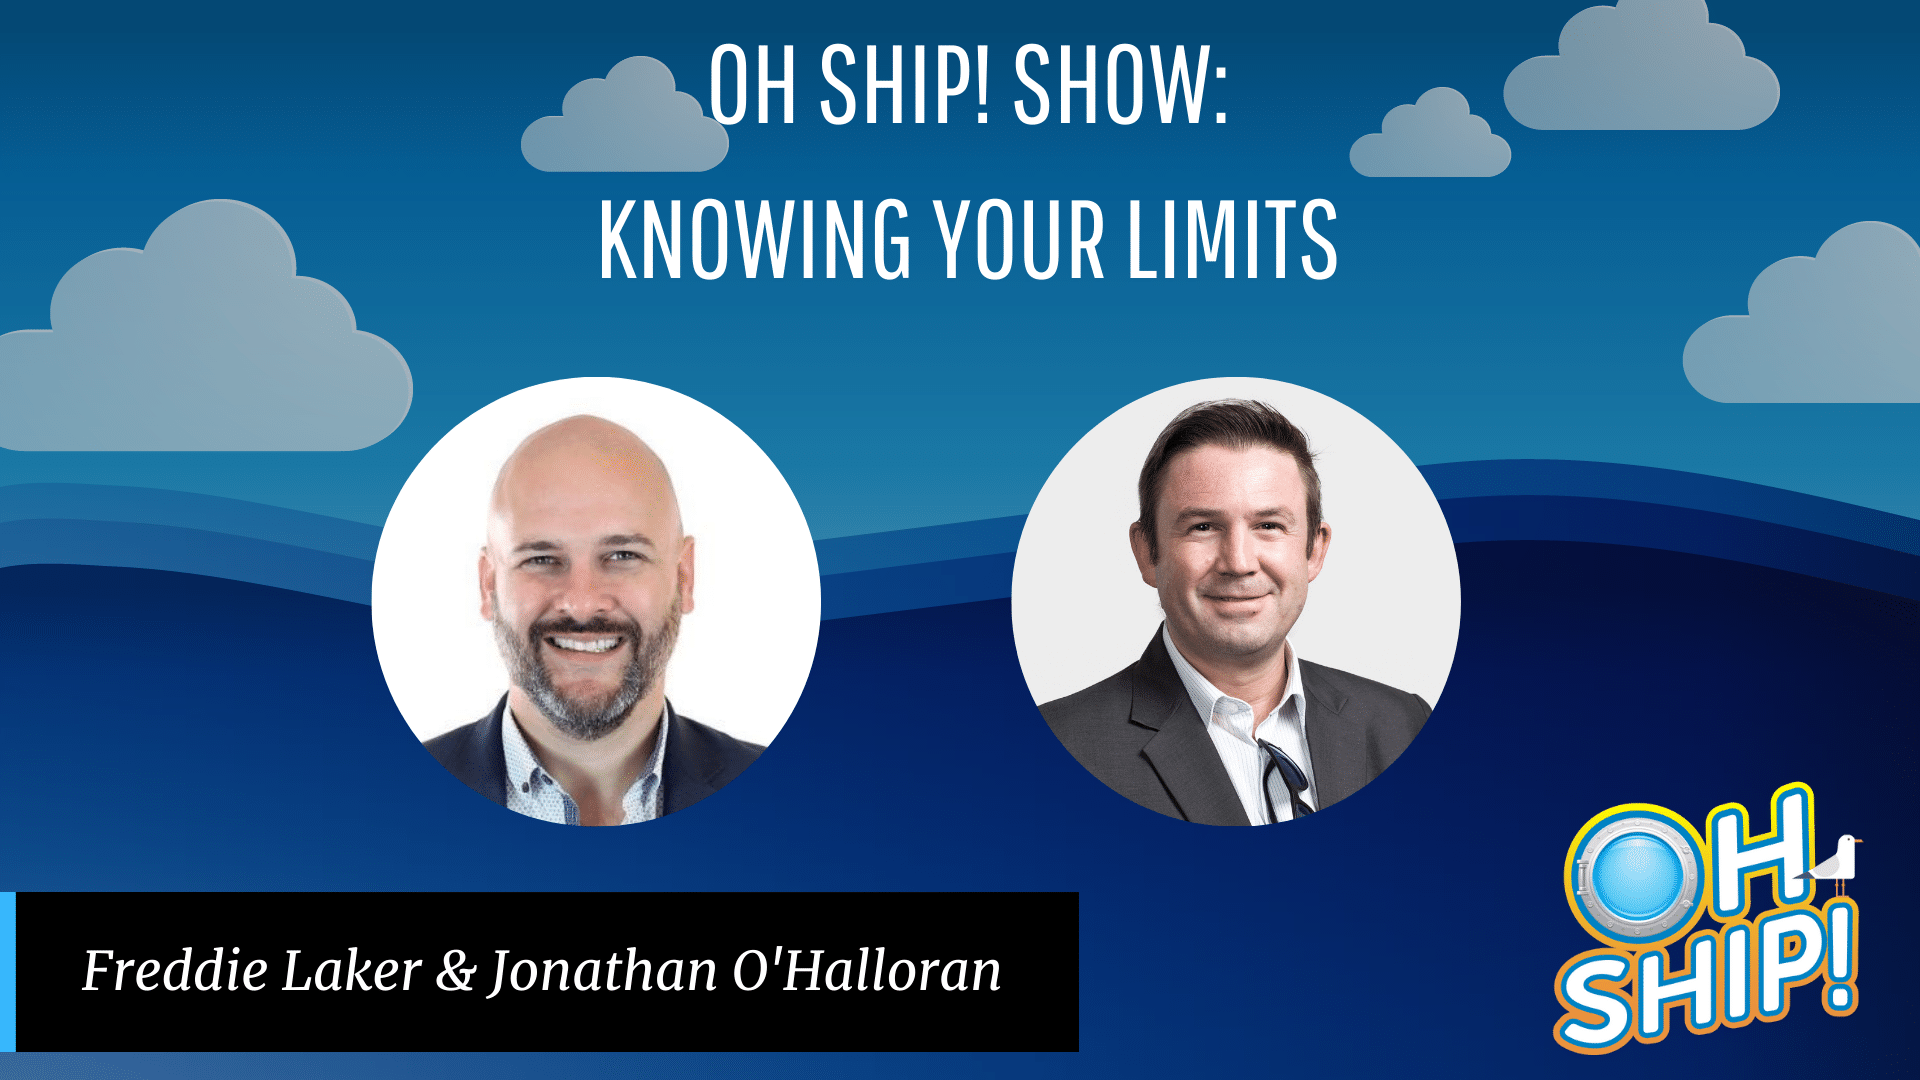 A promotional graphic for the "Oh Ship! Show: Knowing Your Limits," featuring hosts Freddie Laker and Jonathan O'Halloran. The background showcases a blue gradient with clouds and waves, embodying the theme of pushing your limits. The "Oh Ship!" logo sits proudly at the bottom right corner.